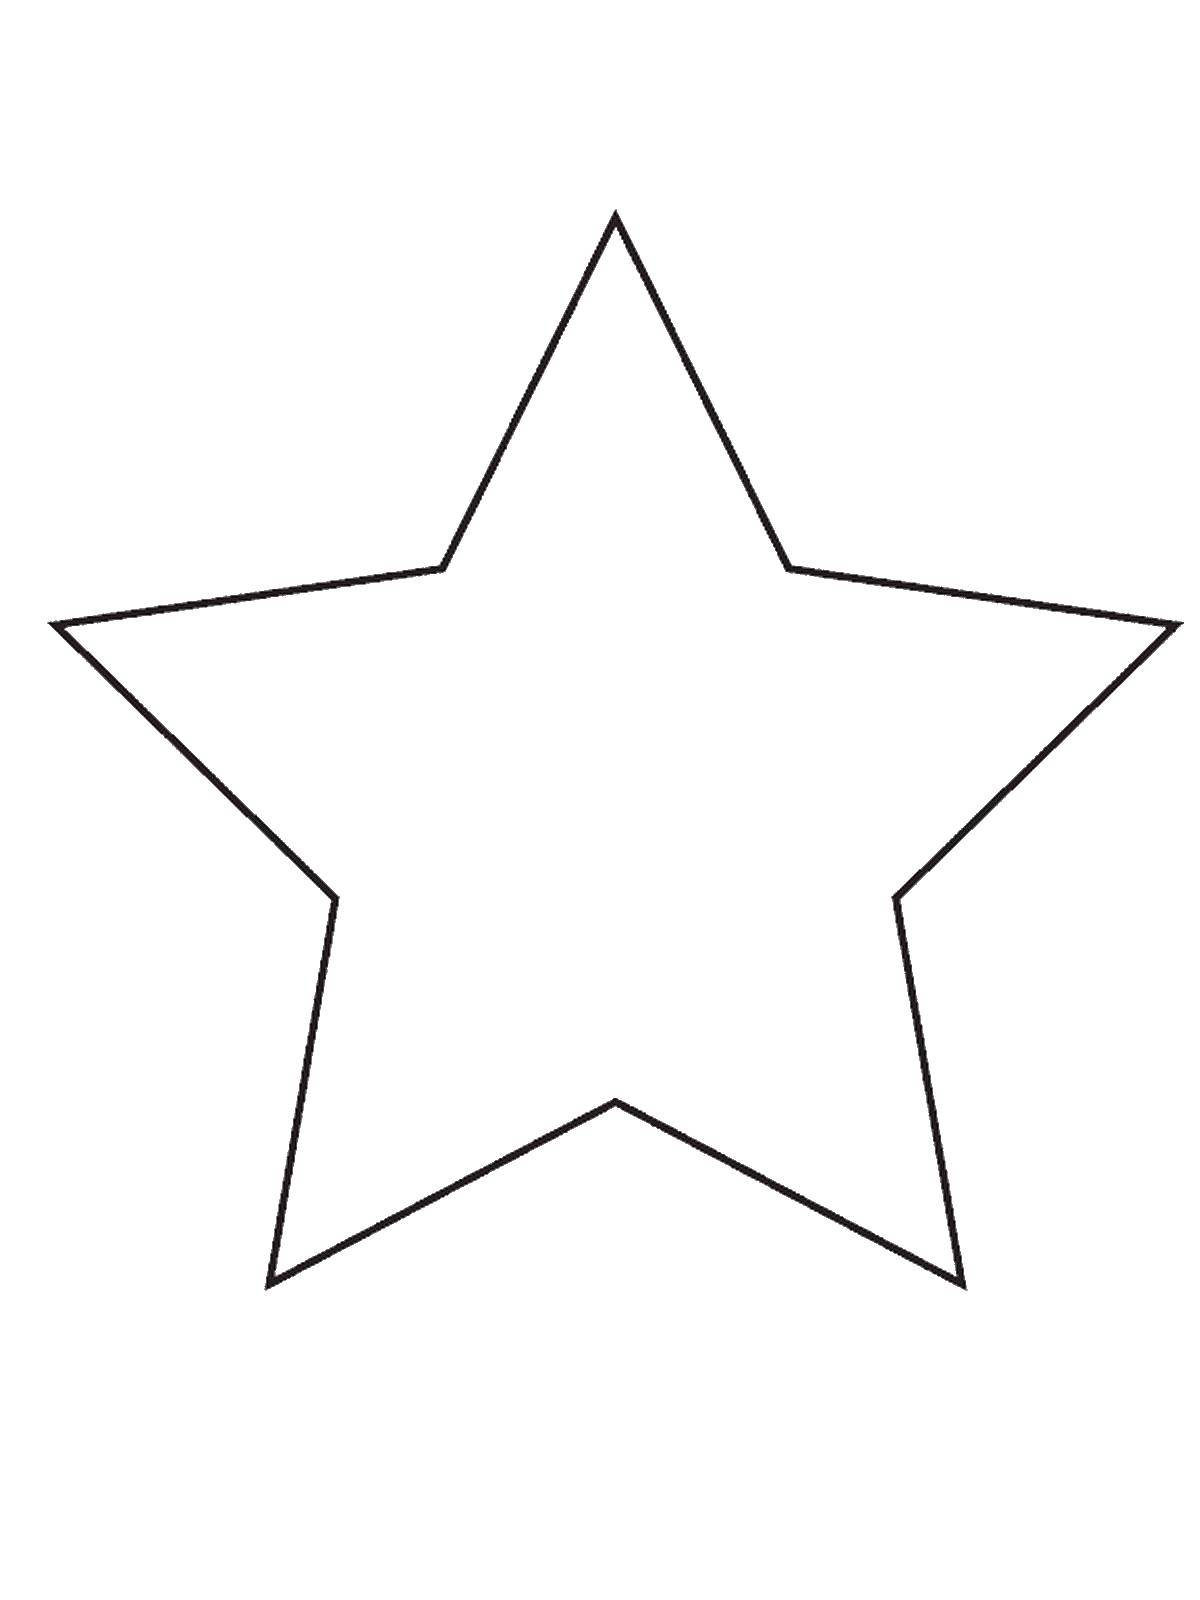 Coloring Figure star. Category coloring of the figures. Tags:  star, shape.